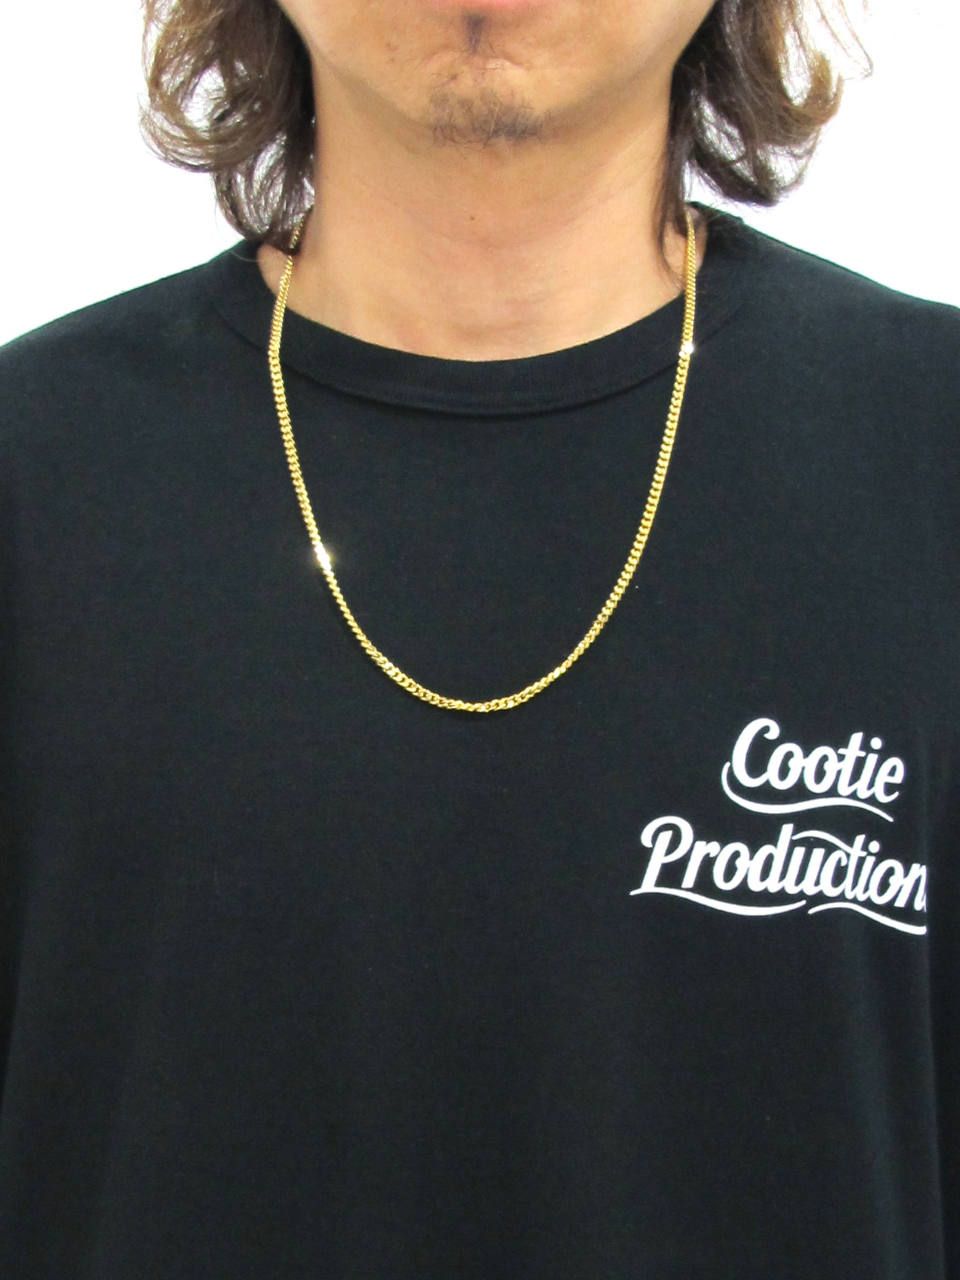 COOTIE / 新作&定番アクセサリー 好評発売中です。 | LOOPHOLE